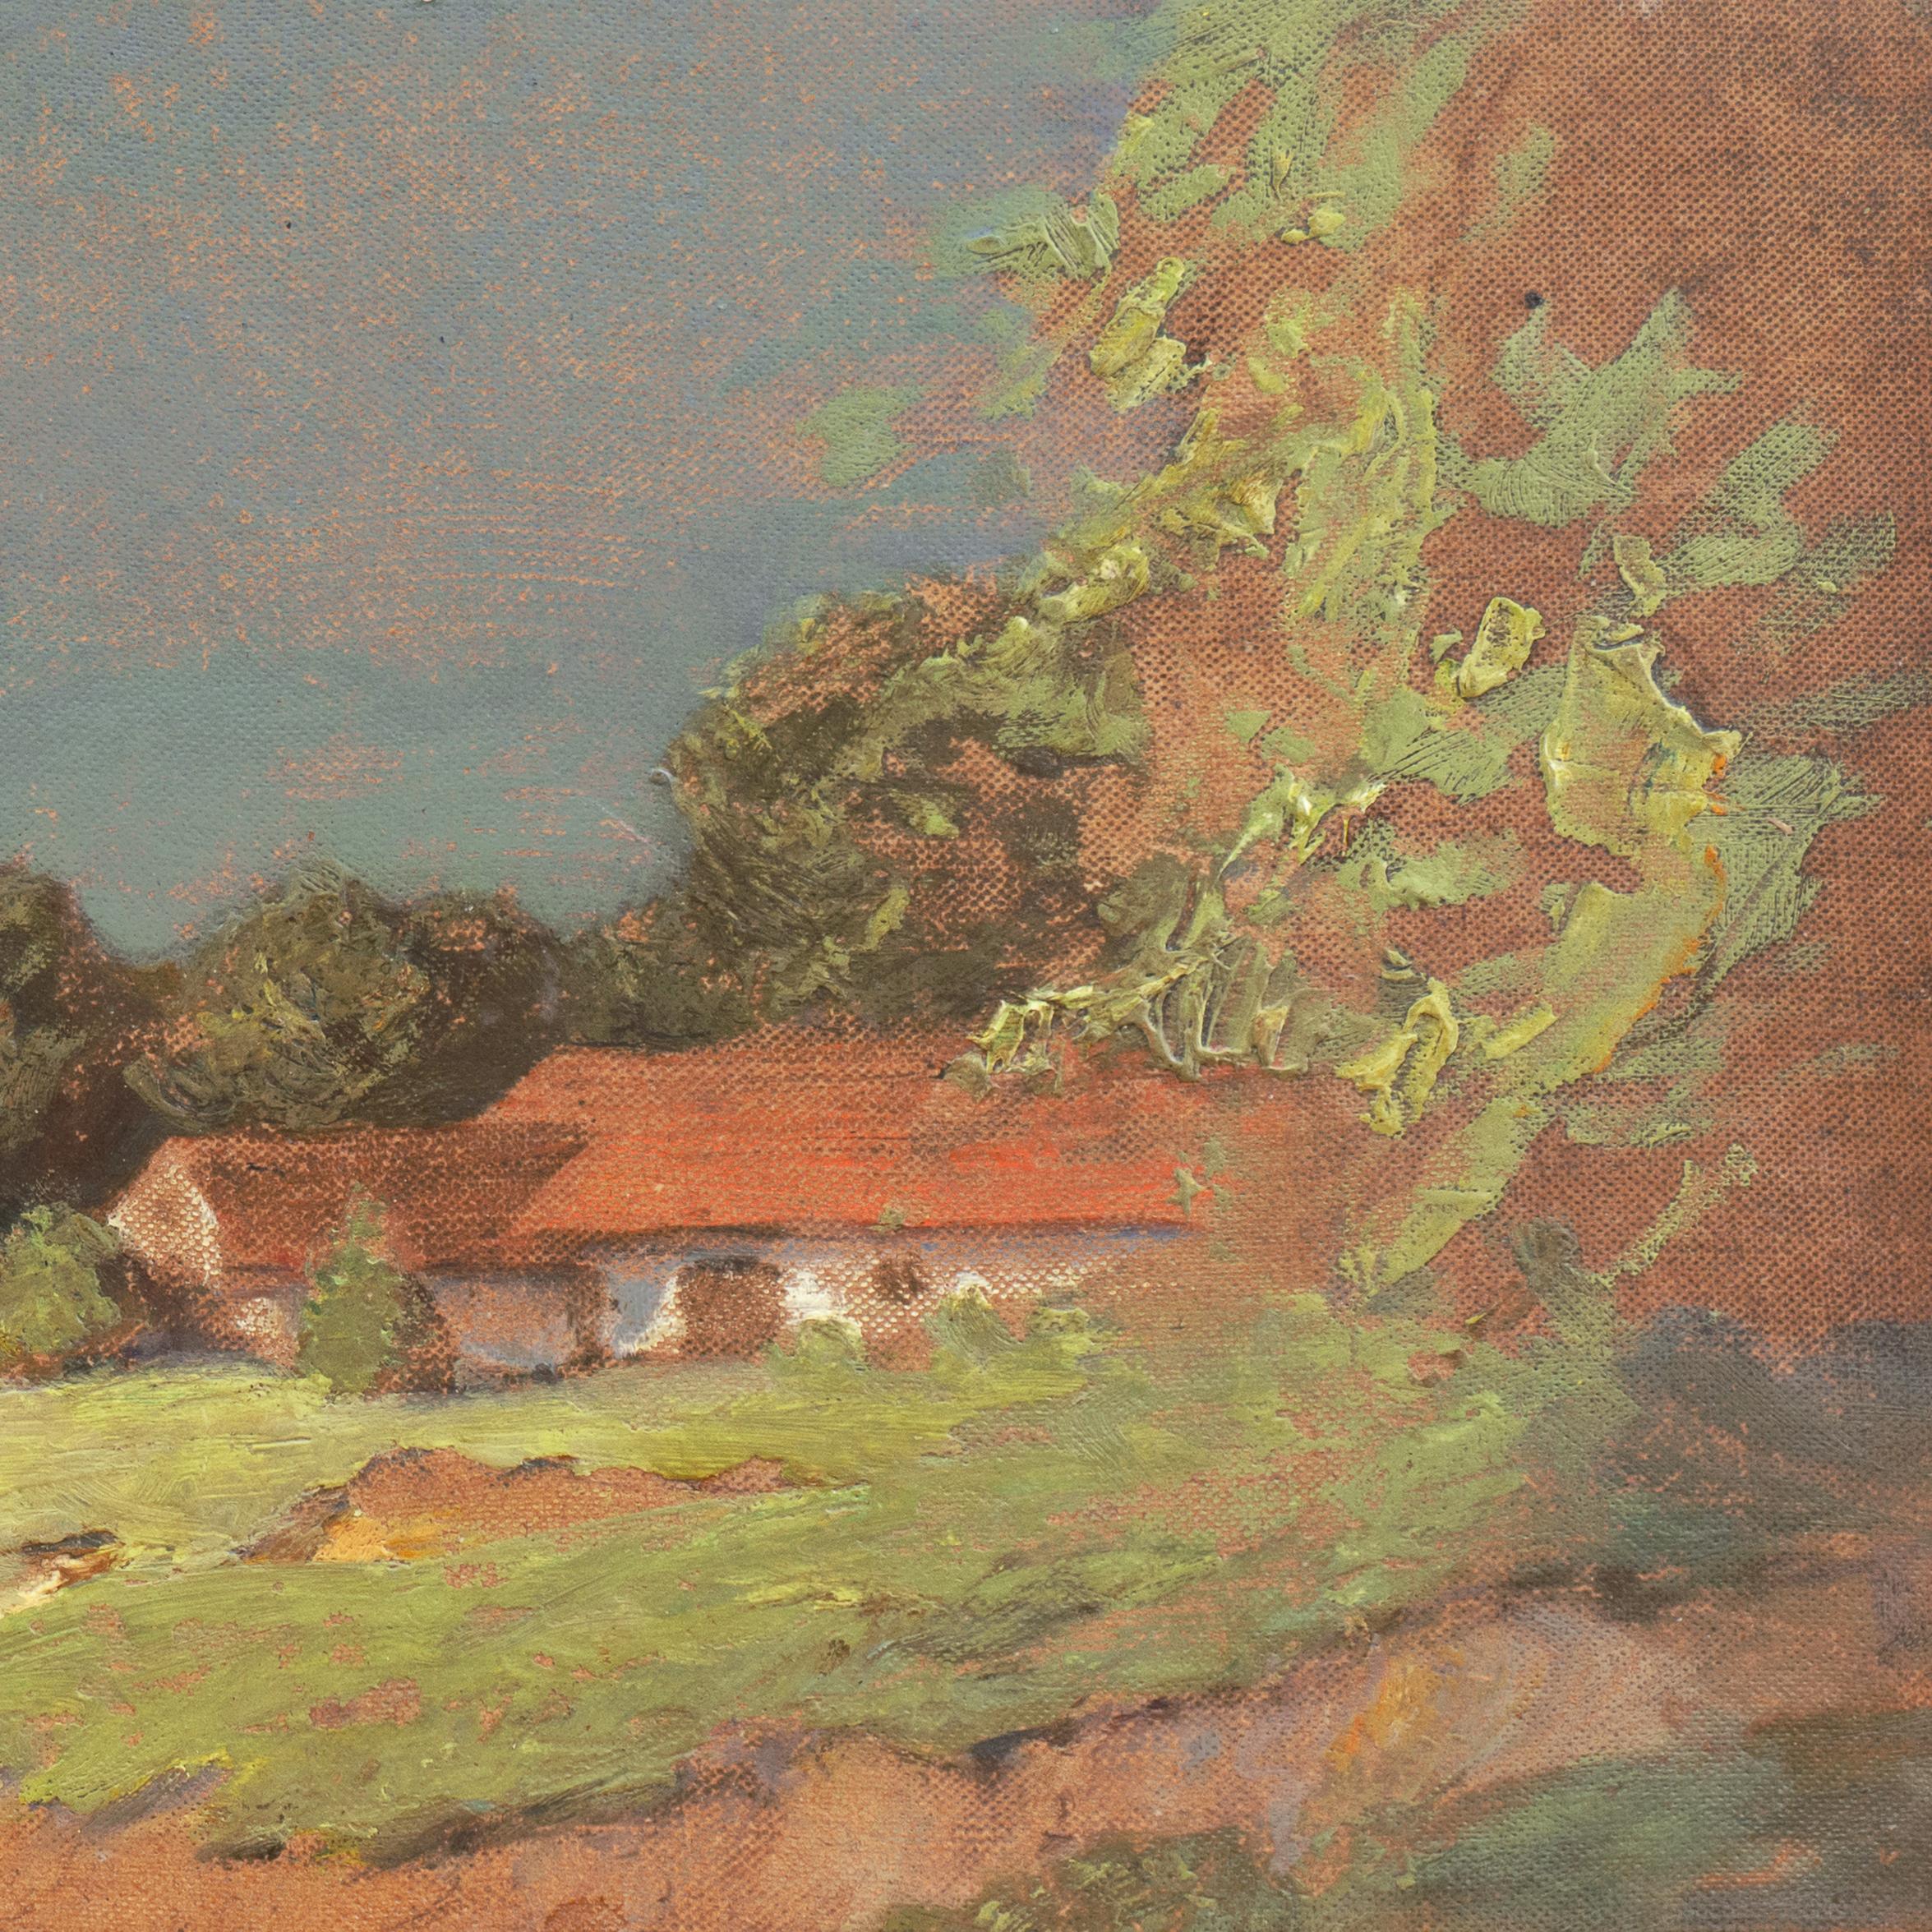 'Hungarian Landscape with Farmhouse', Munich School, National Academy, Budapest - Brown Landscape Painting by Endre Komaromi-Kacz